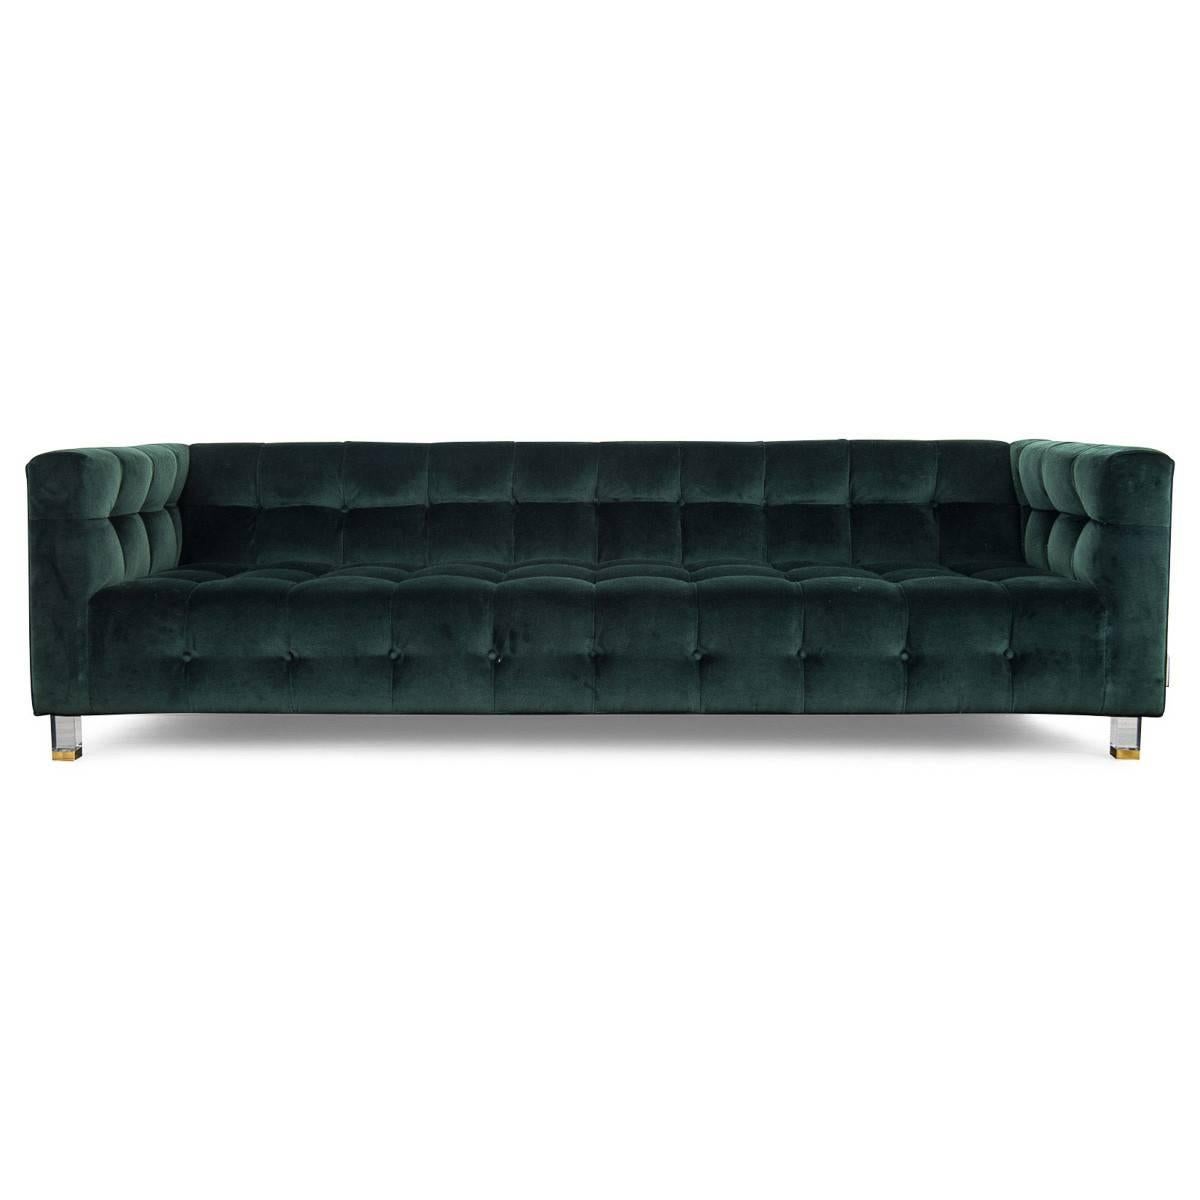 Say hello to the brand new Delano sofa. It's an elegant addition to the sofa line, featuring beautiful and luxurious biscuit tufting, 4